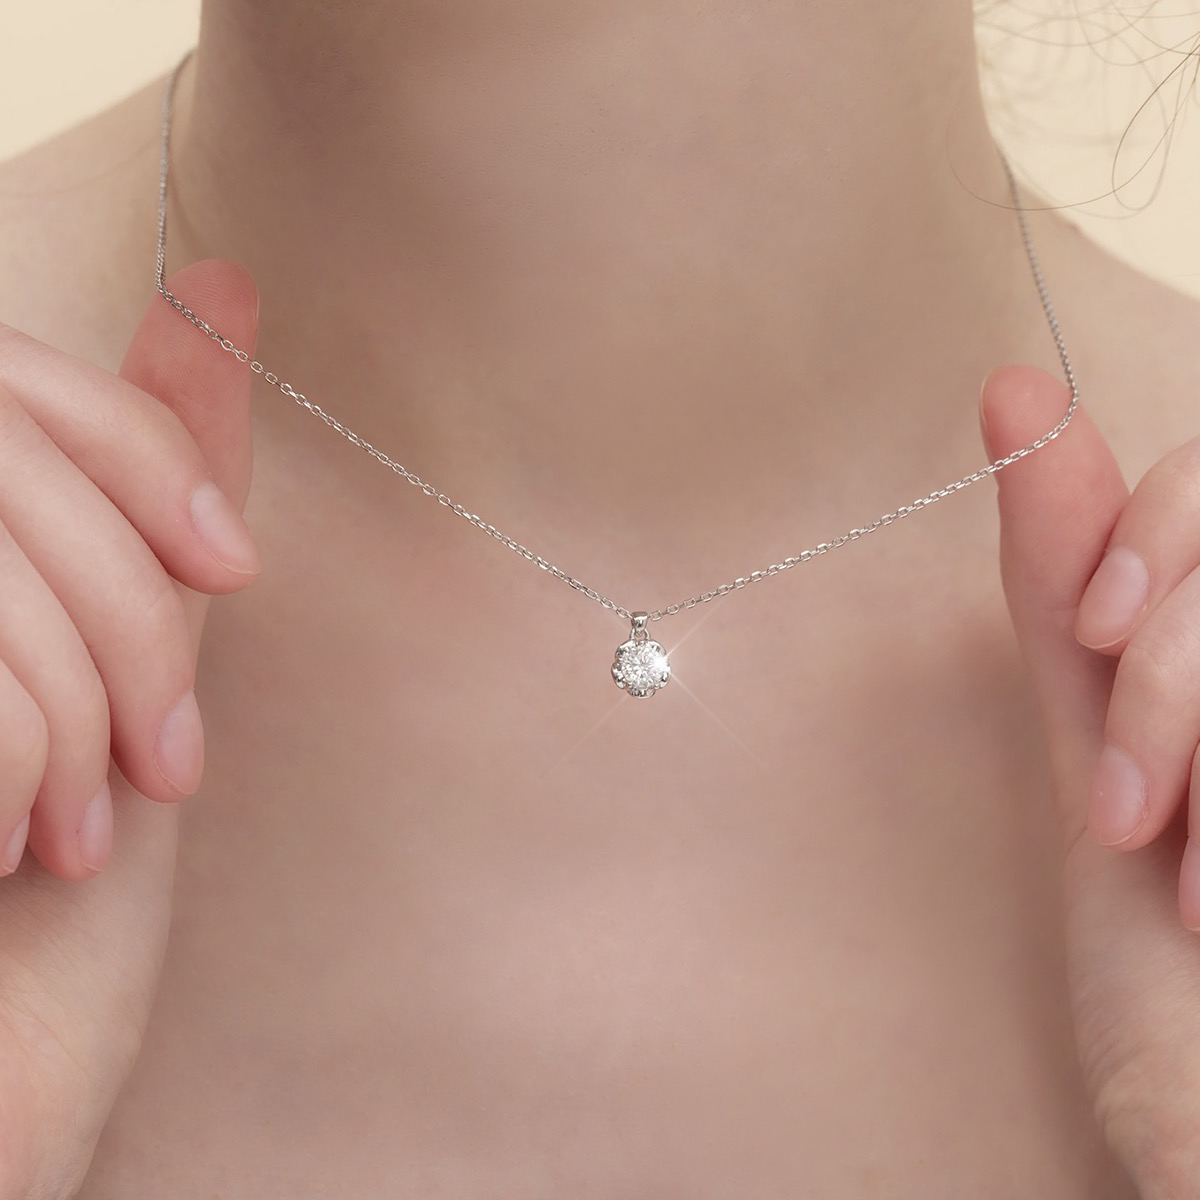 Eleanor Necklace | Sterling Silver